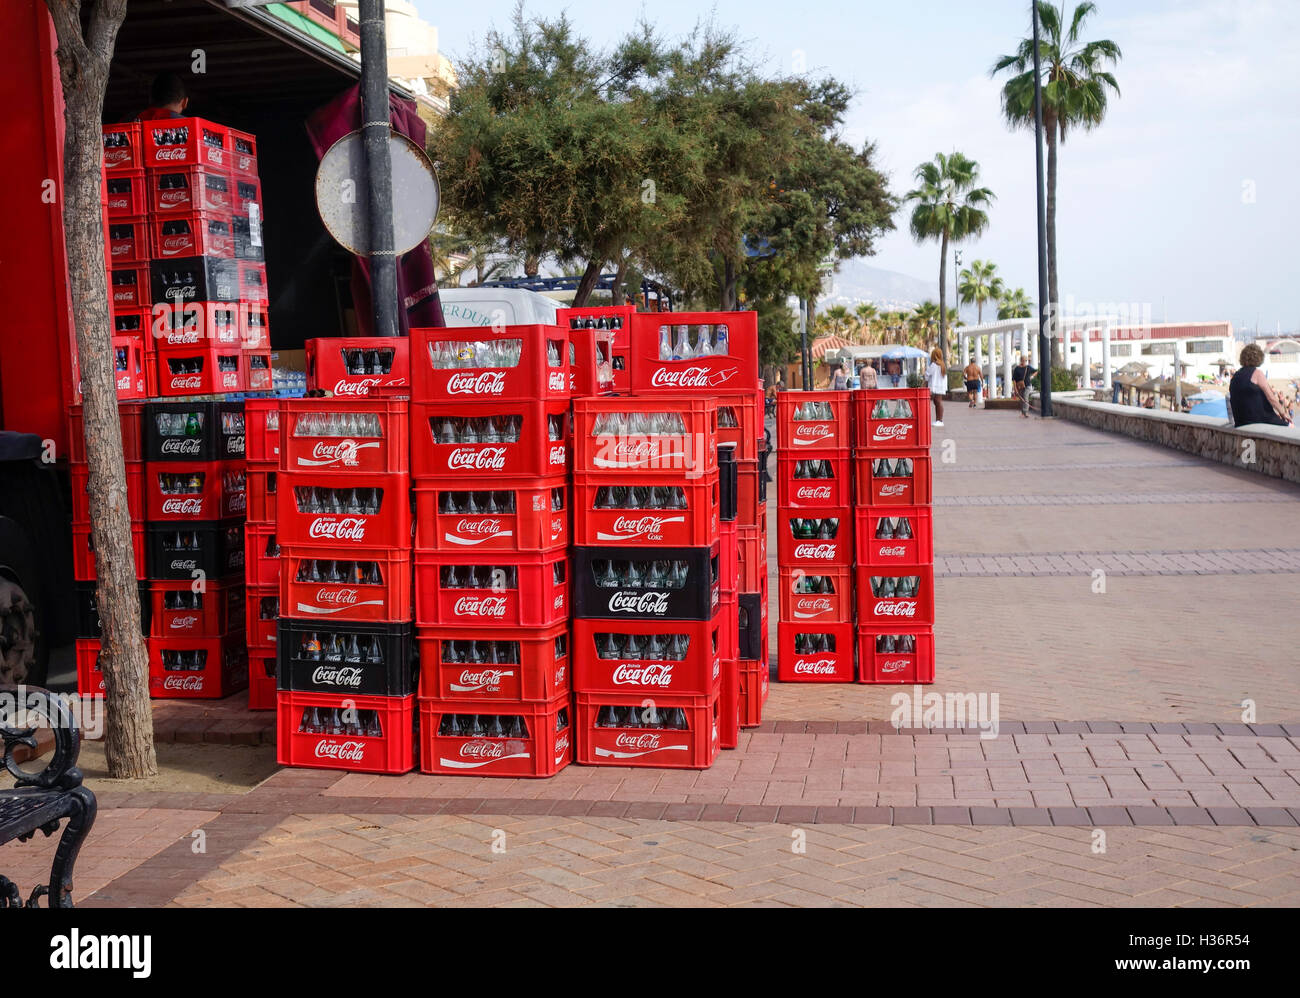 Delivery truck and Coca Cola Bottles in Plastic crates blocking street. Spain. Stock Photo